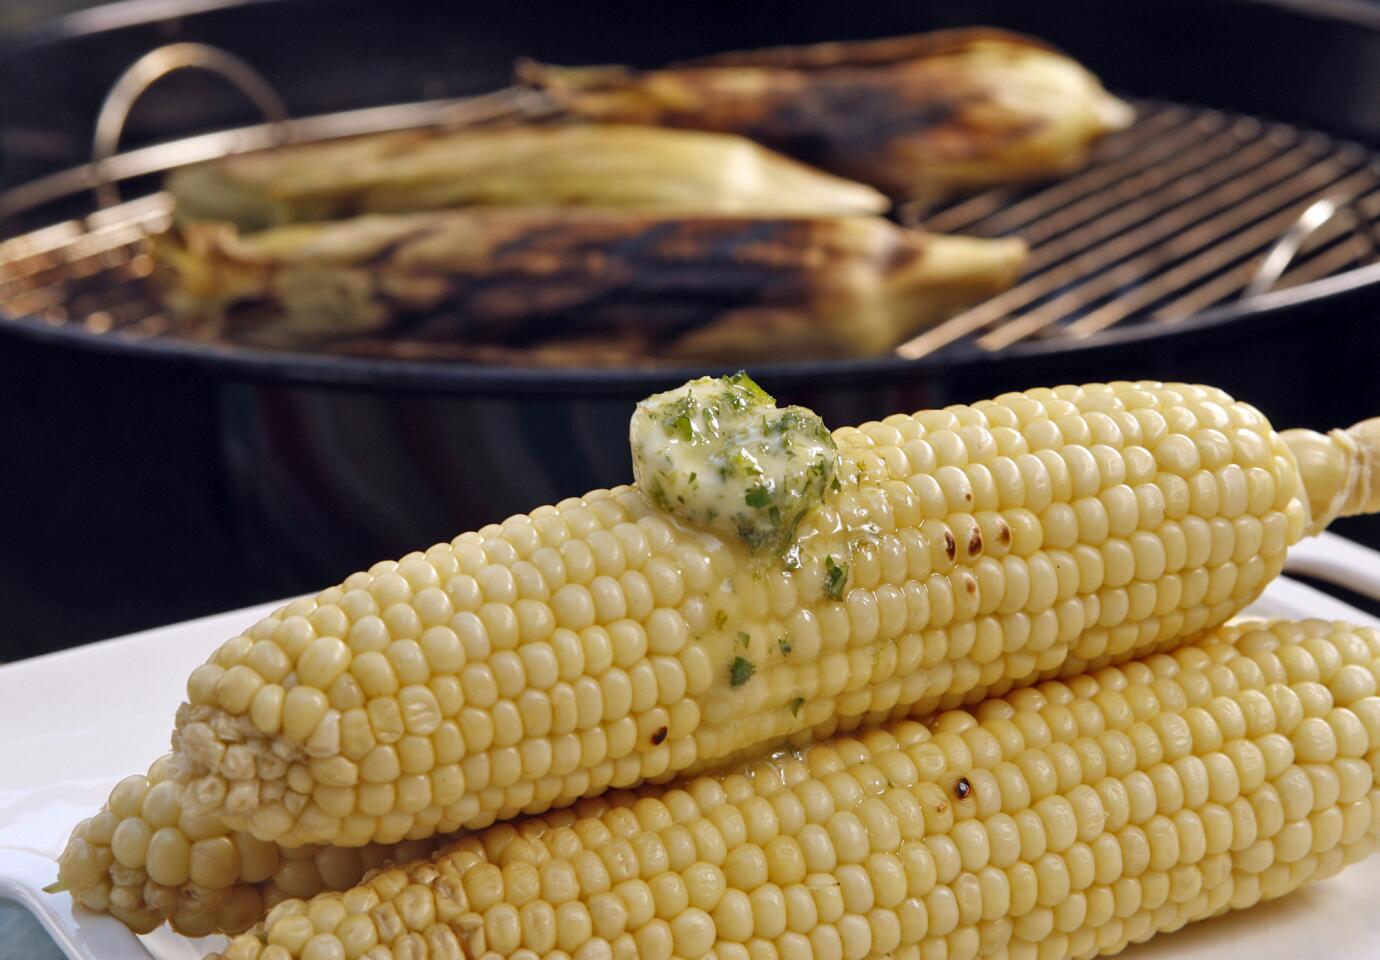 This butter is spiked. Recipe: Grilled corn with tequila-lime butter